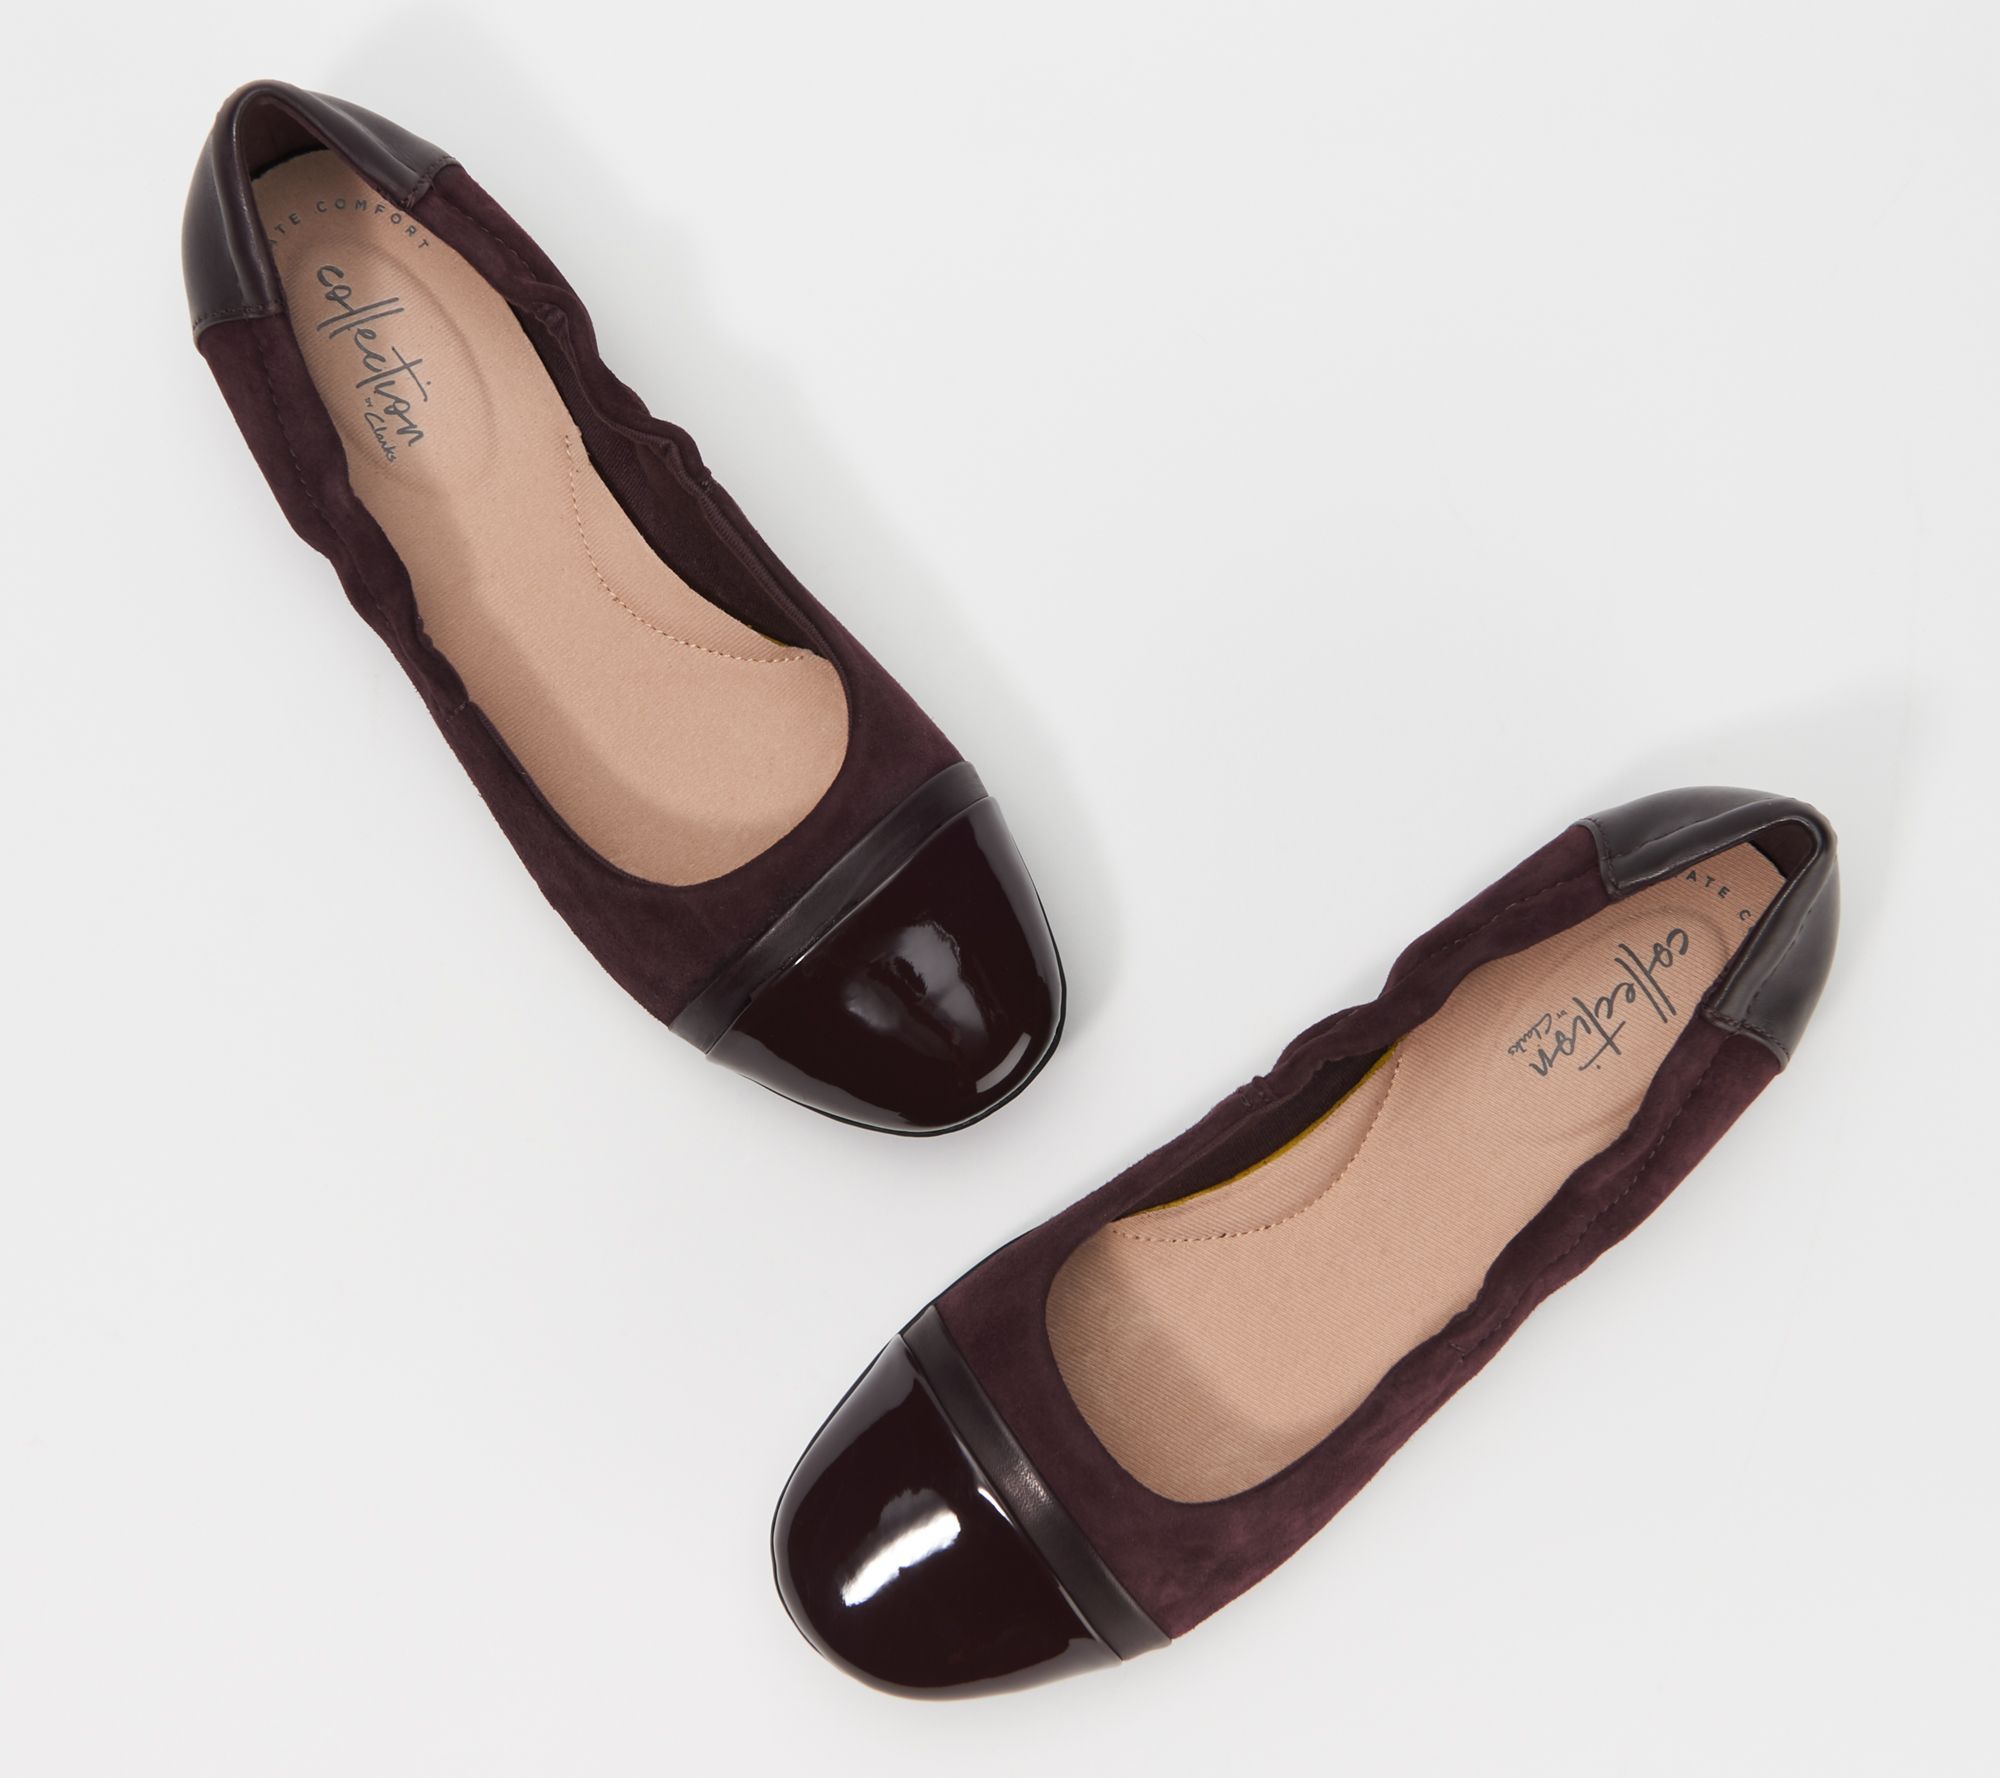 ladies flat shoes at clarks